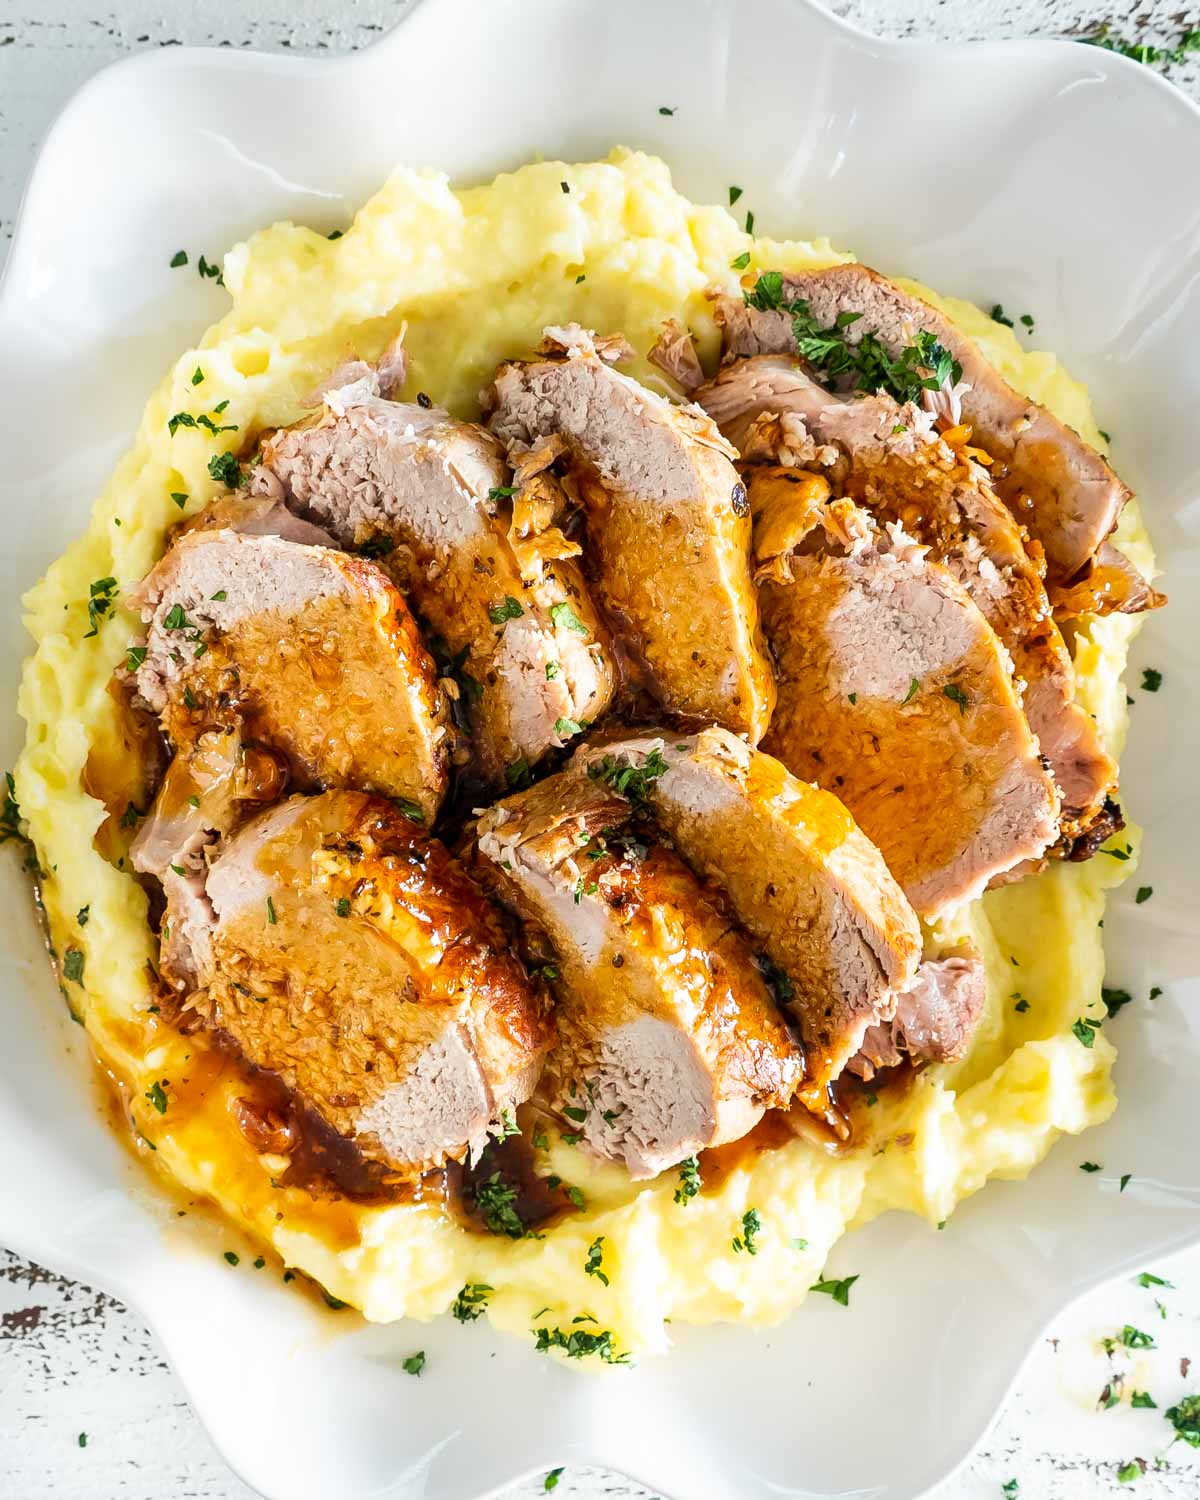 sliced pork loin roast on a bed of mashed potatoes.